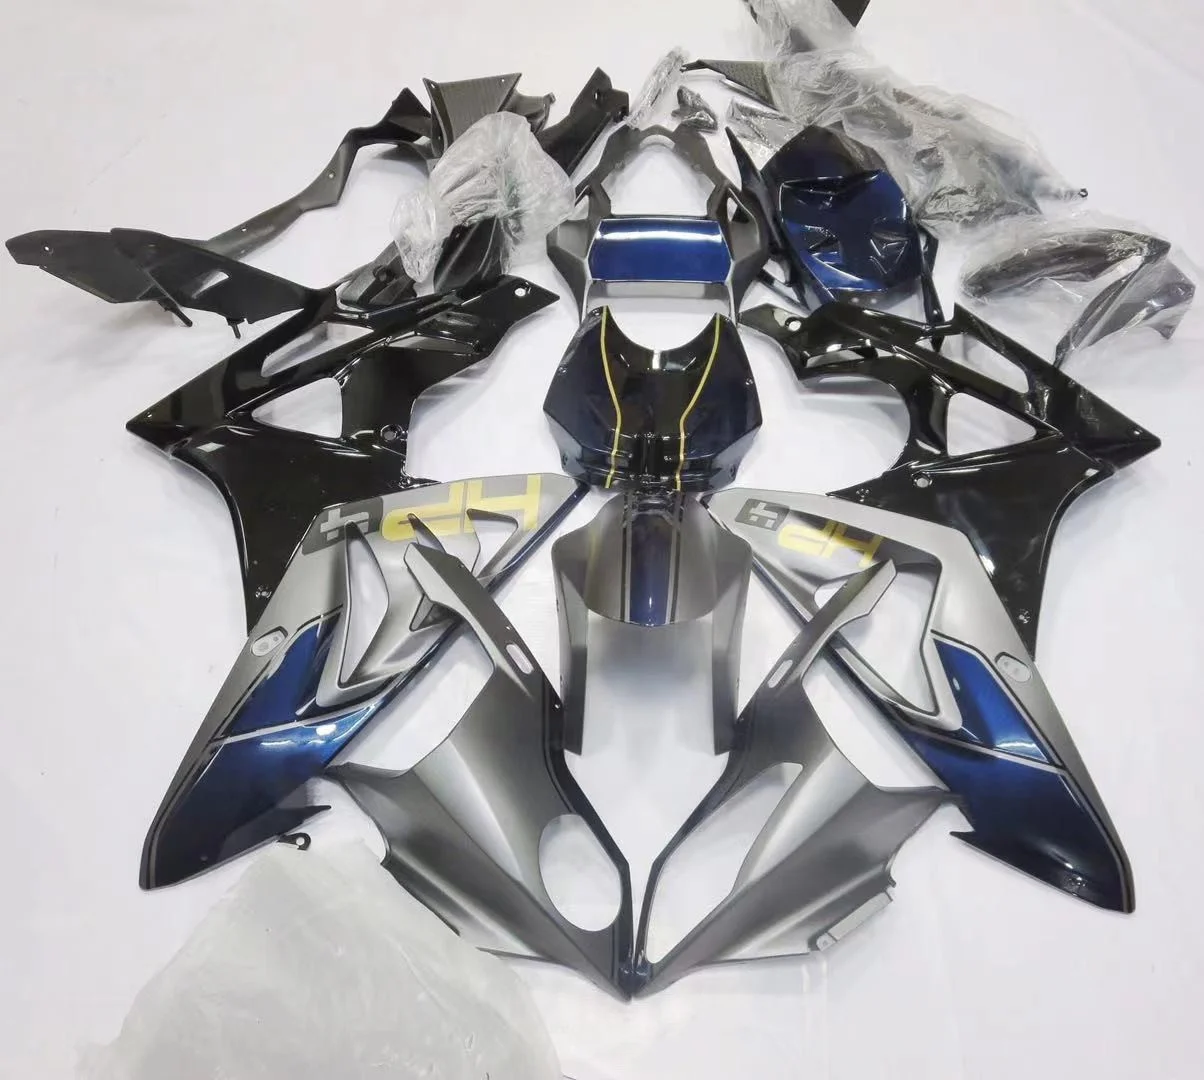 

2022 WHSC Motorcycle Fairing Fit For BMW S1000RR 2012-2014 ABS Plastic Bodywork Kit, Pictures shown